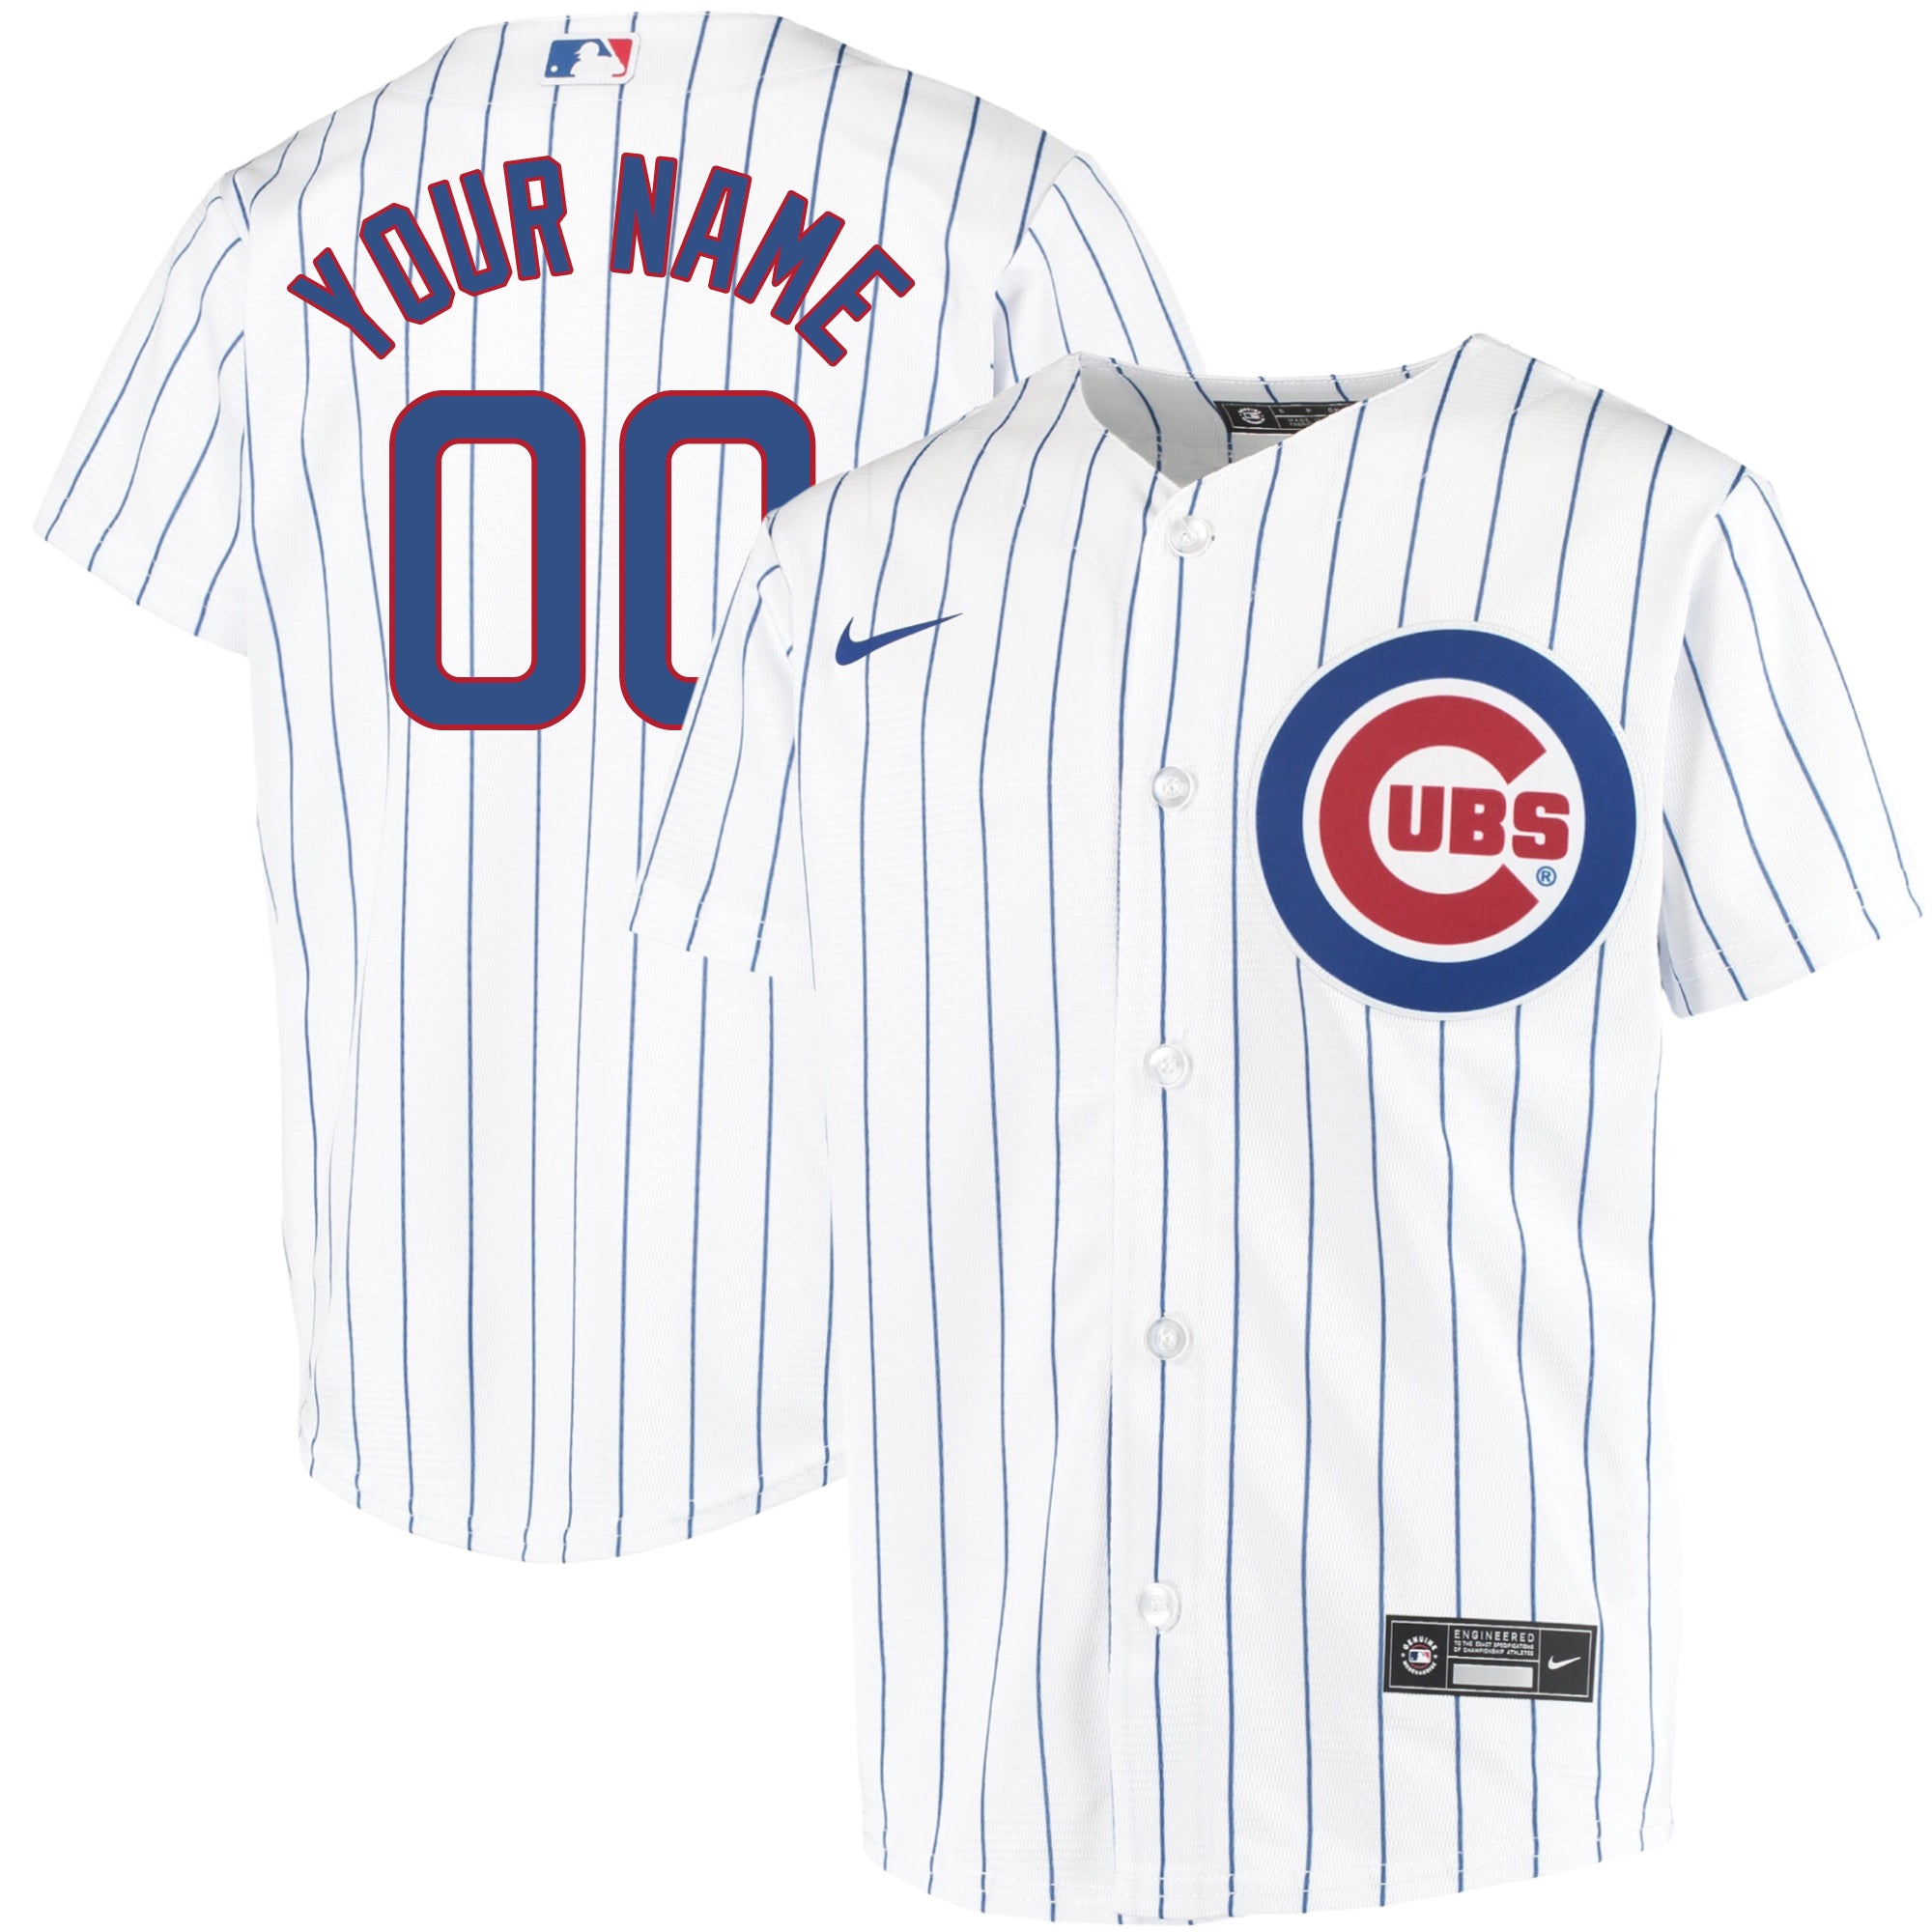 Kyle Schwarber Chicago Cubs Nike Home Replica Player Name Jersey - White